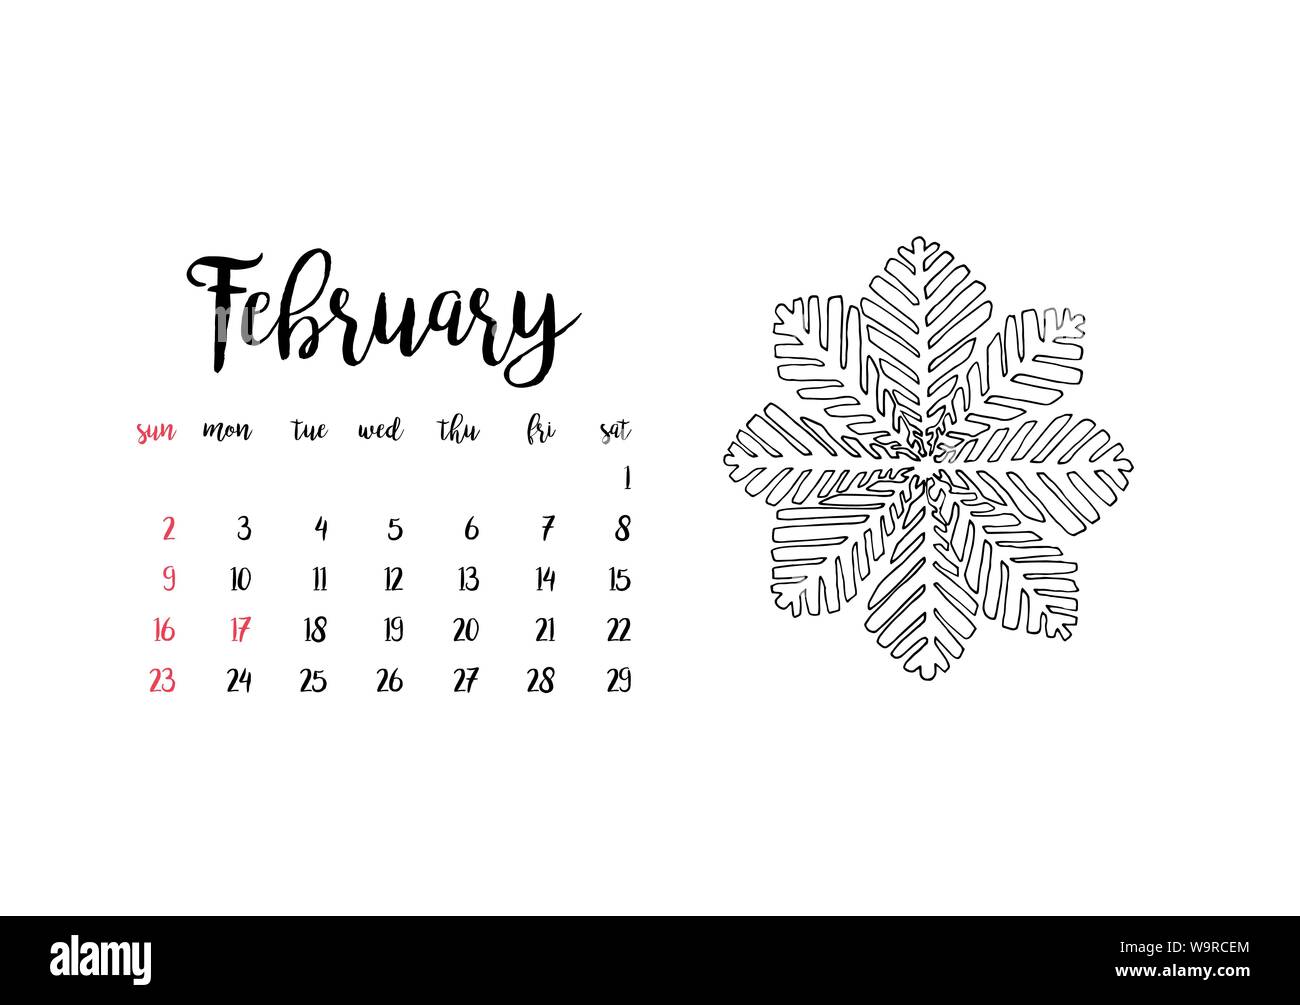 Monthly Desk Calendar Horizontal Template 2020 For Month February